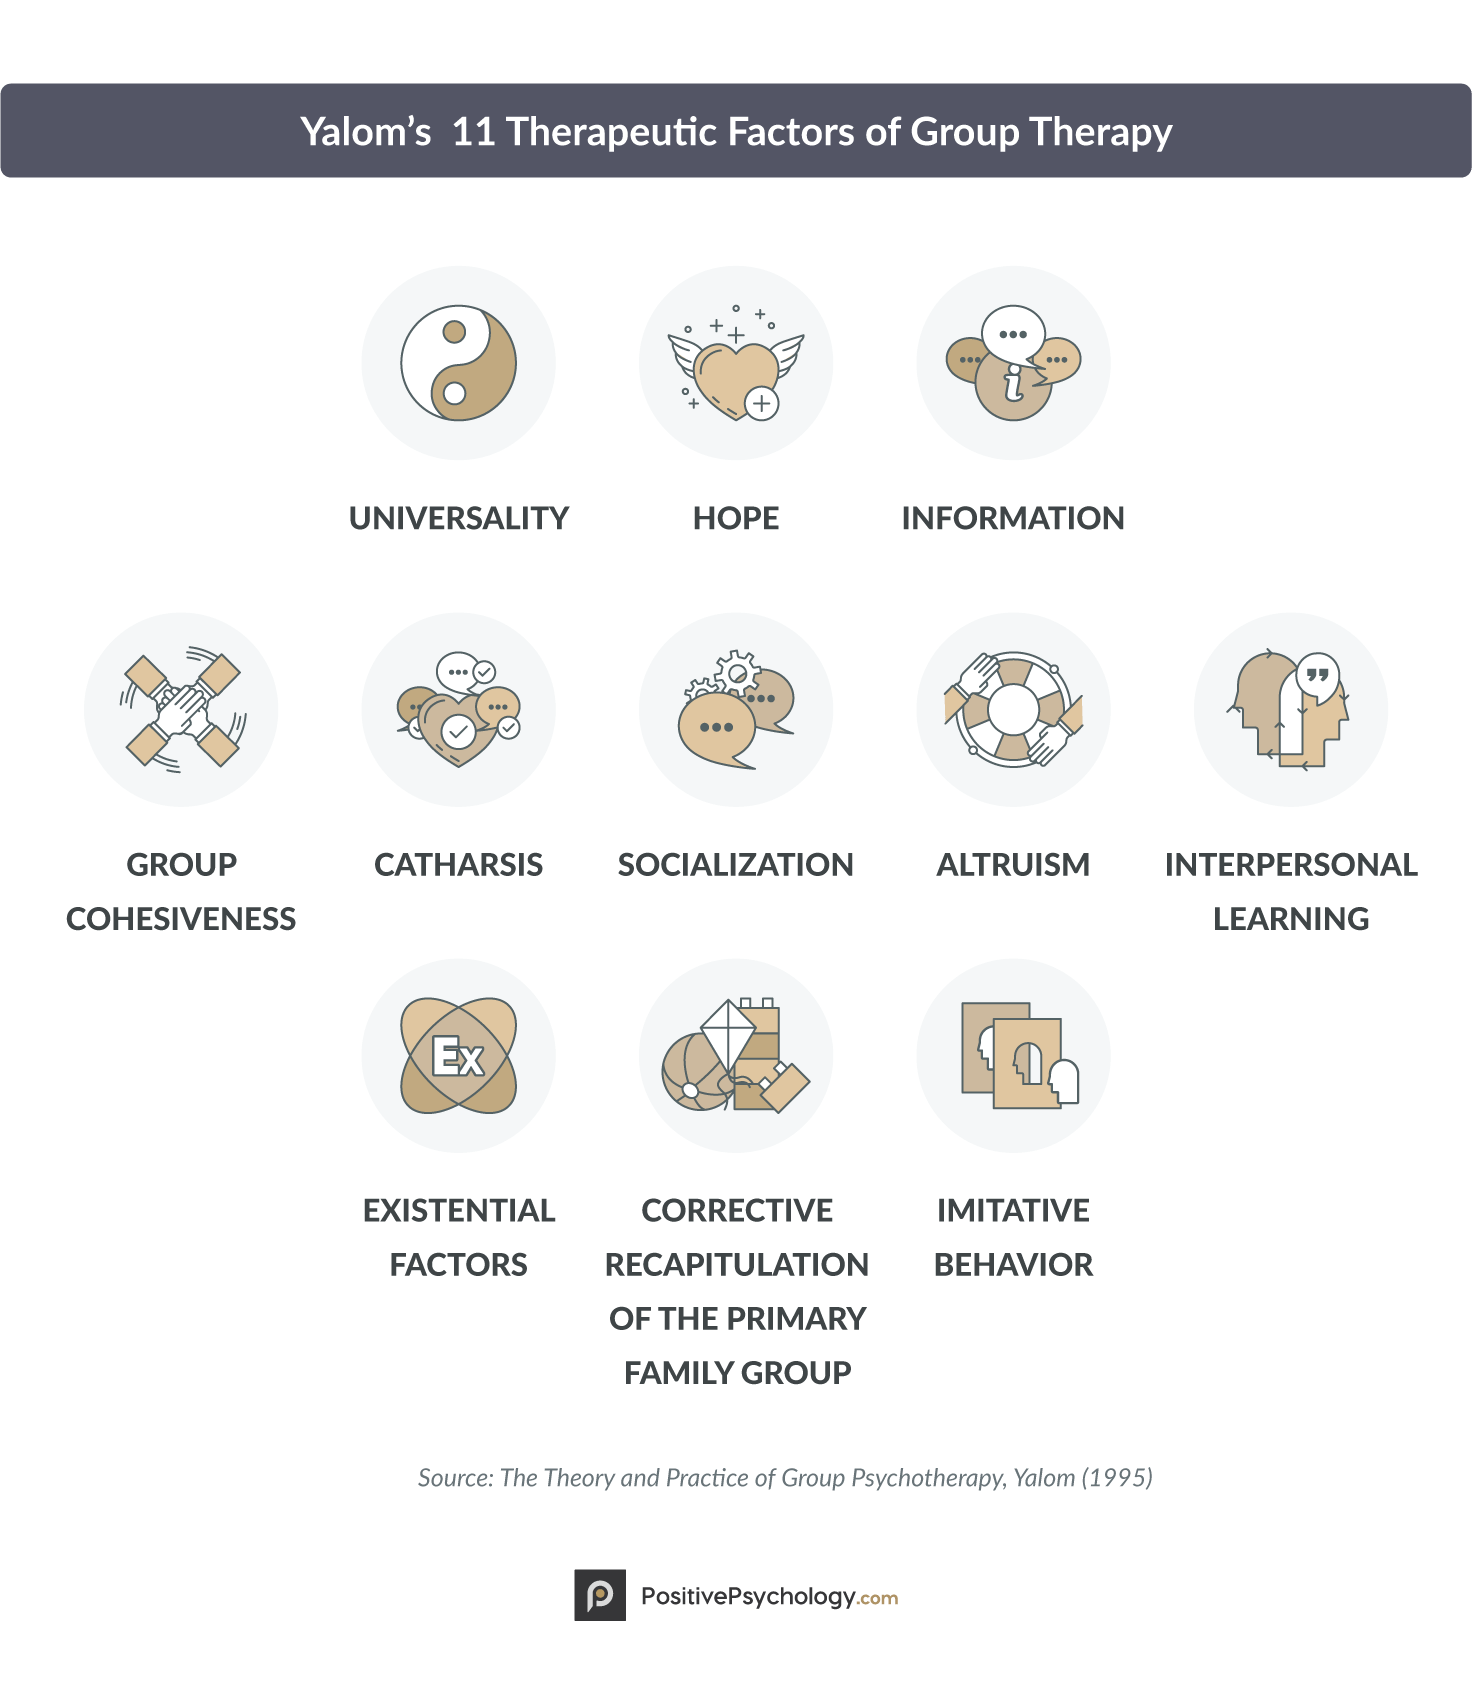 Yalom's 11 Therapeutic Factors of Group Therapy